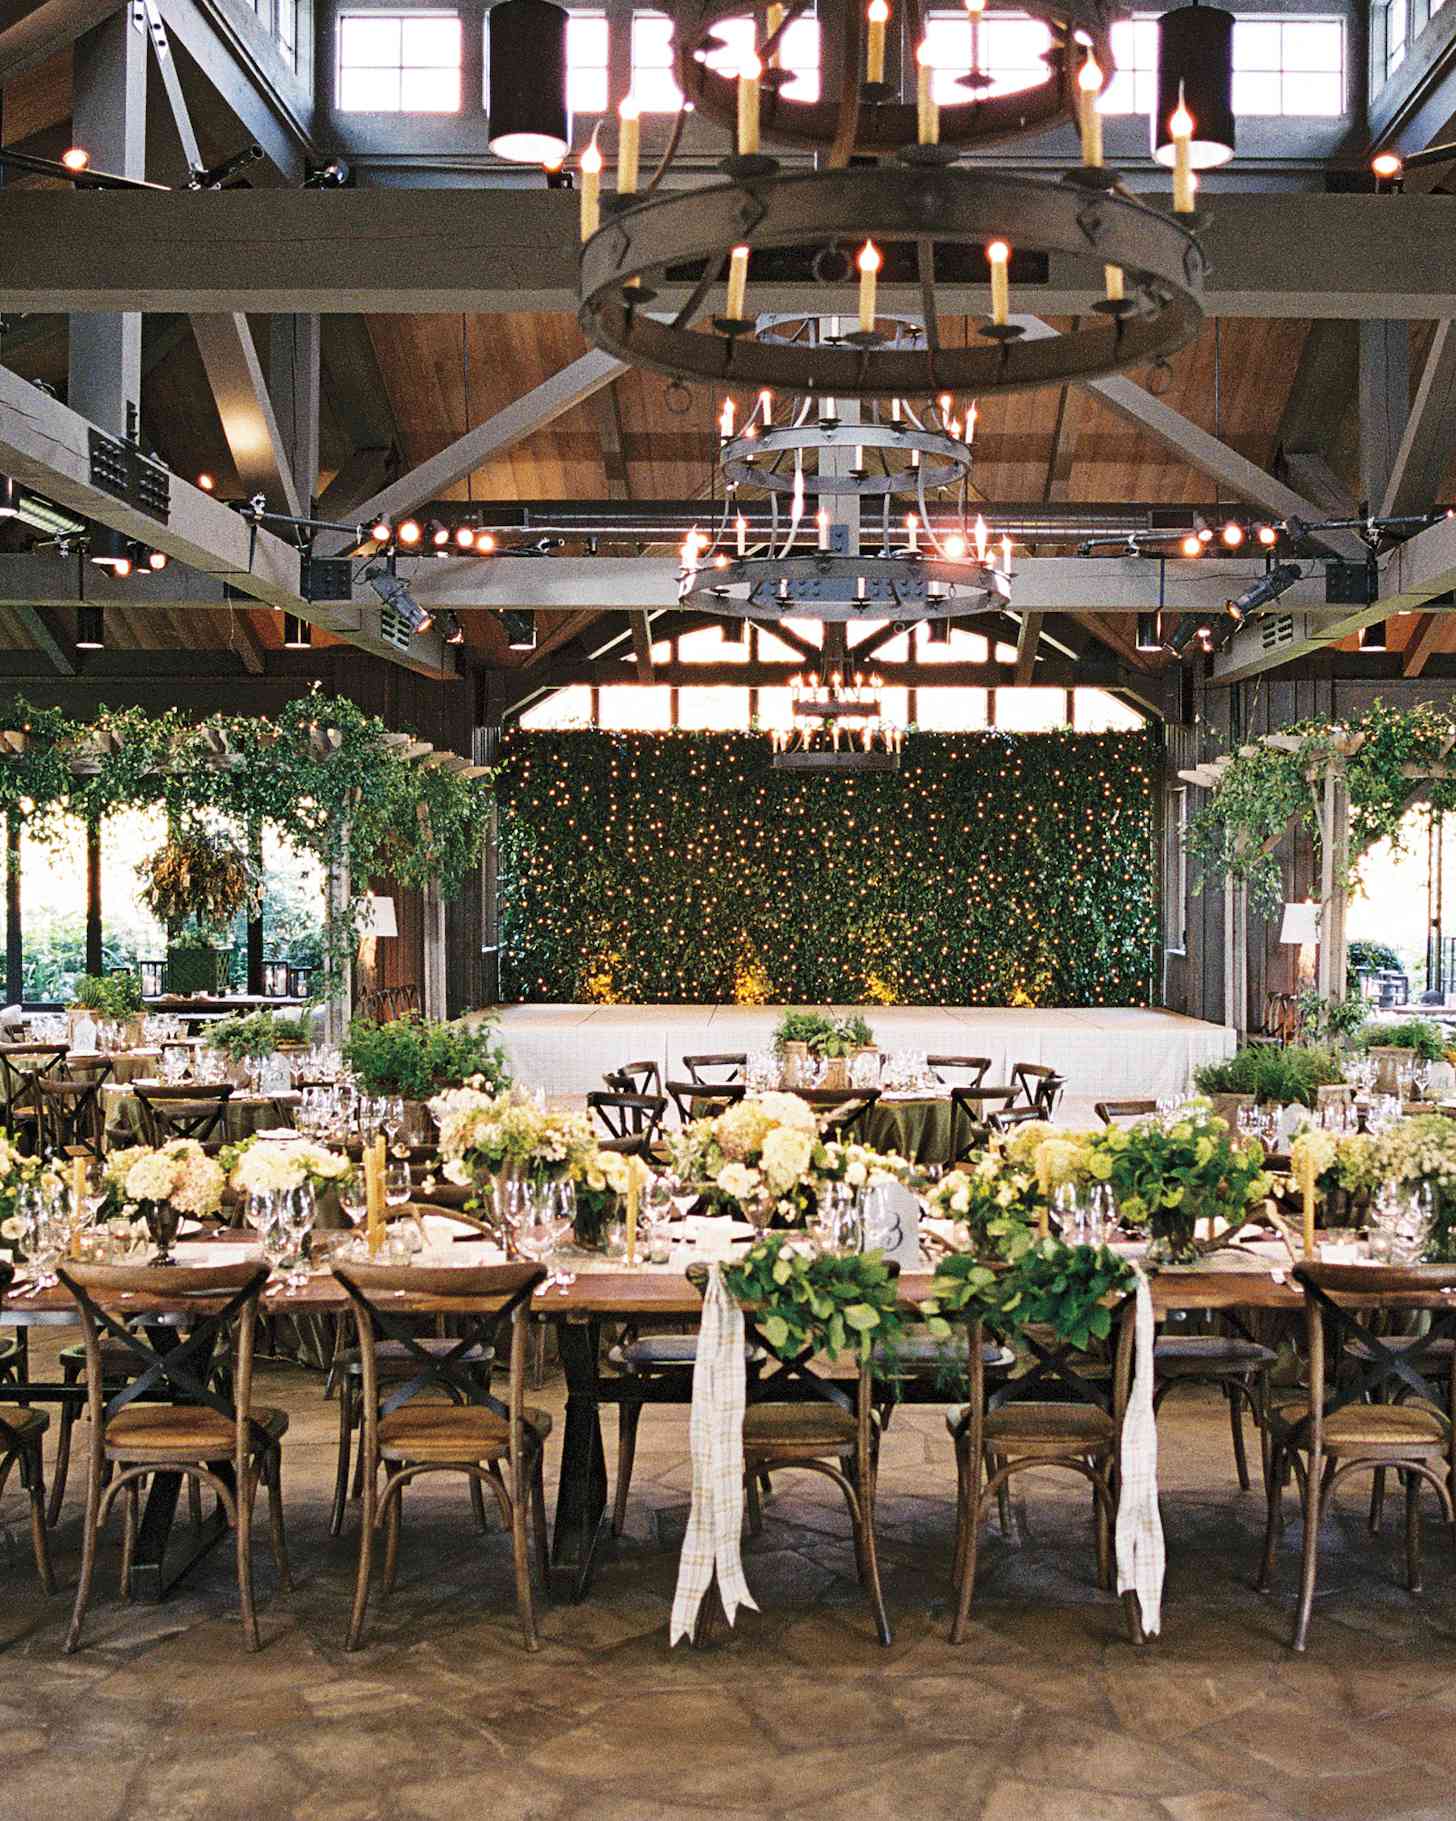 A Refined and Rustic Reception